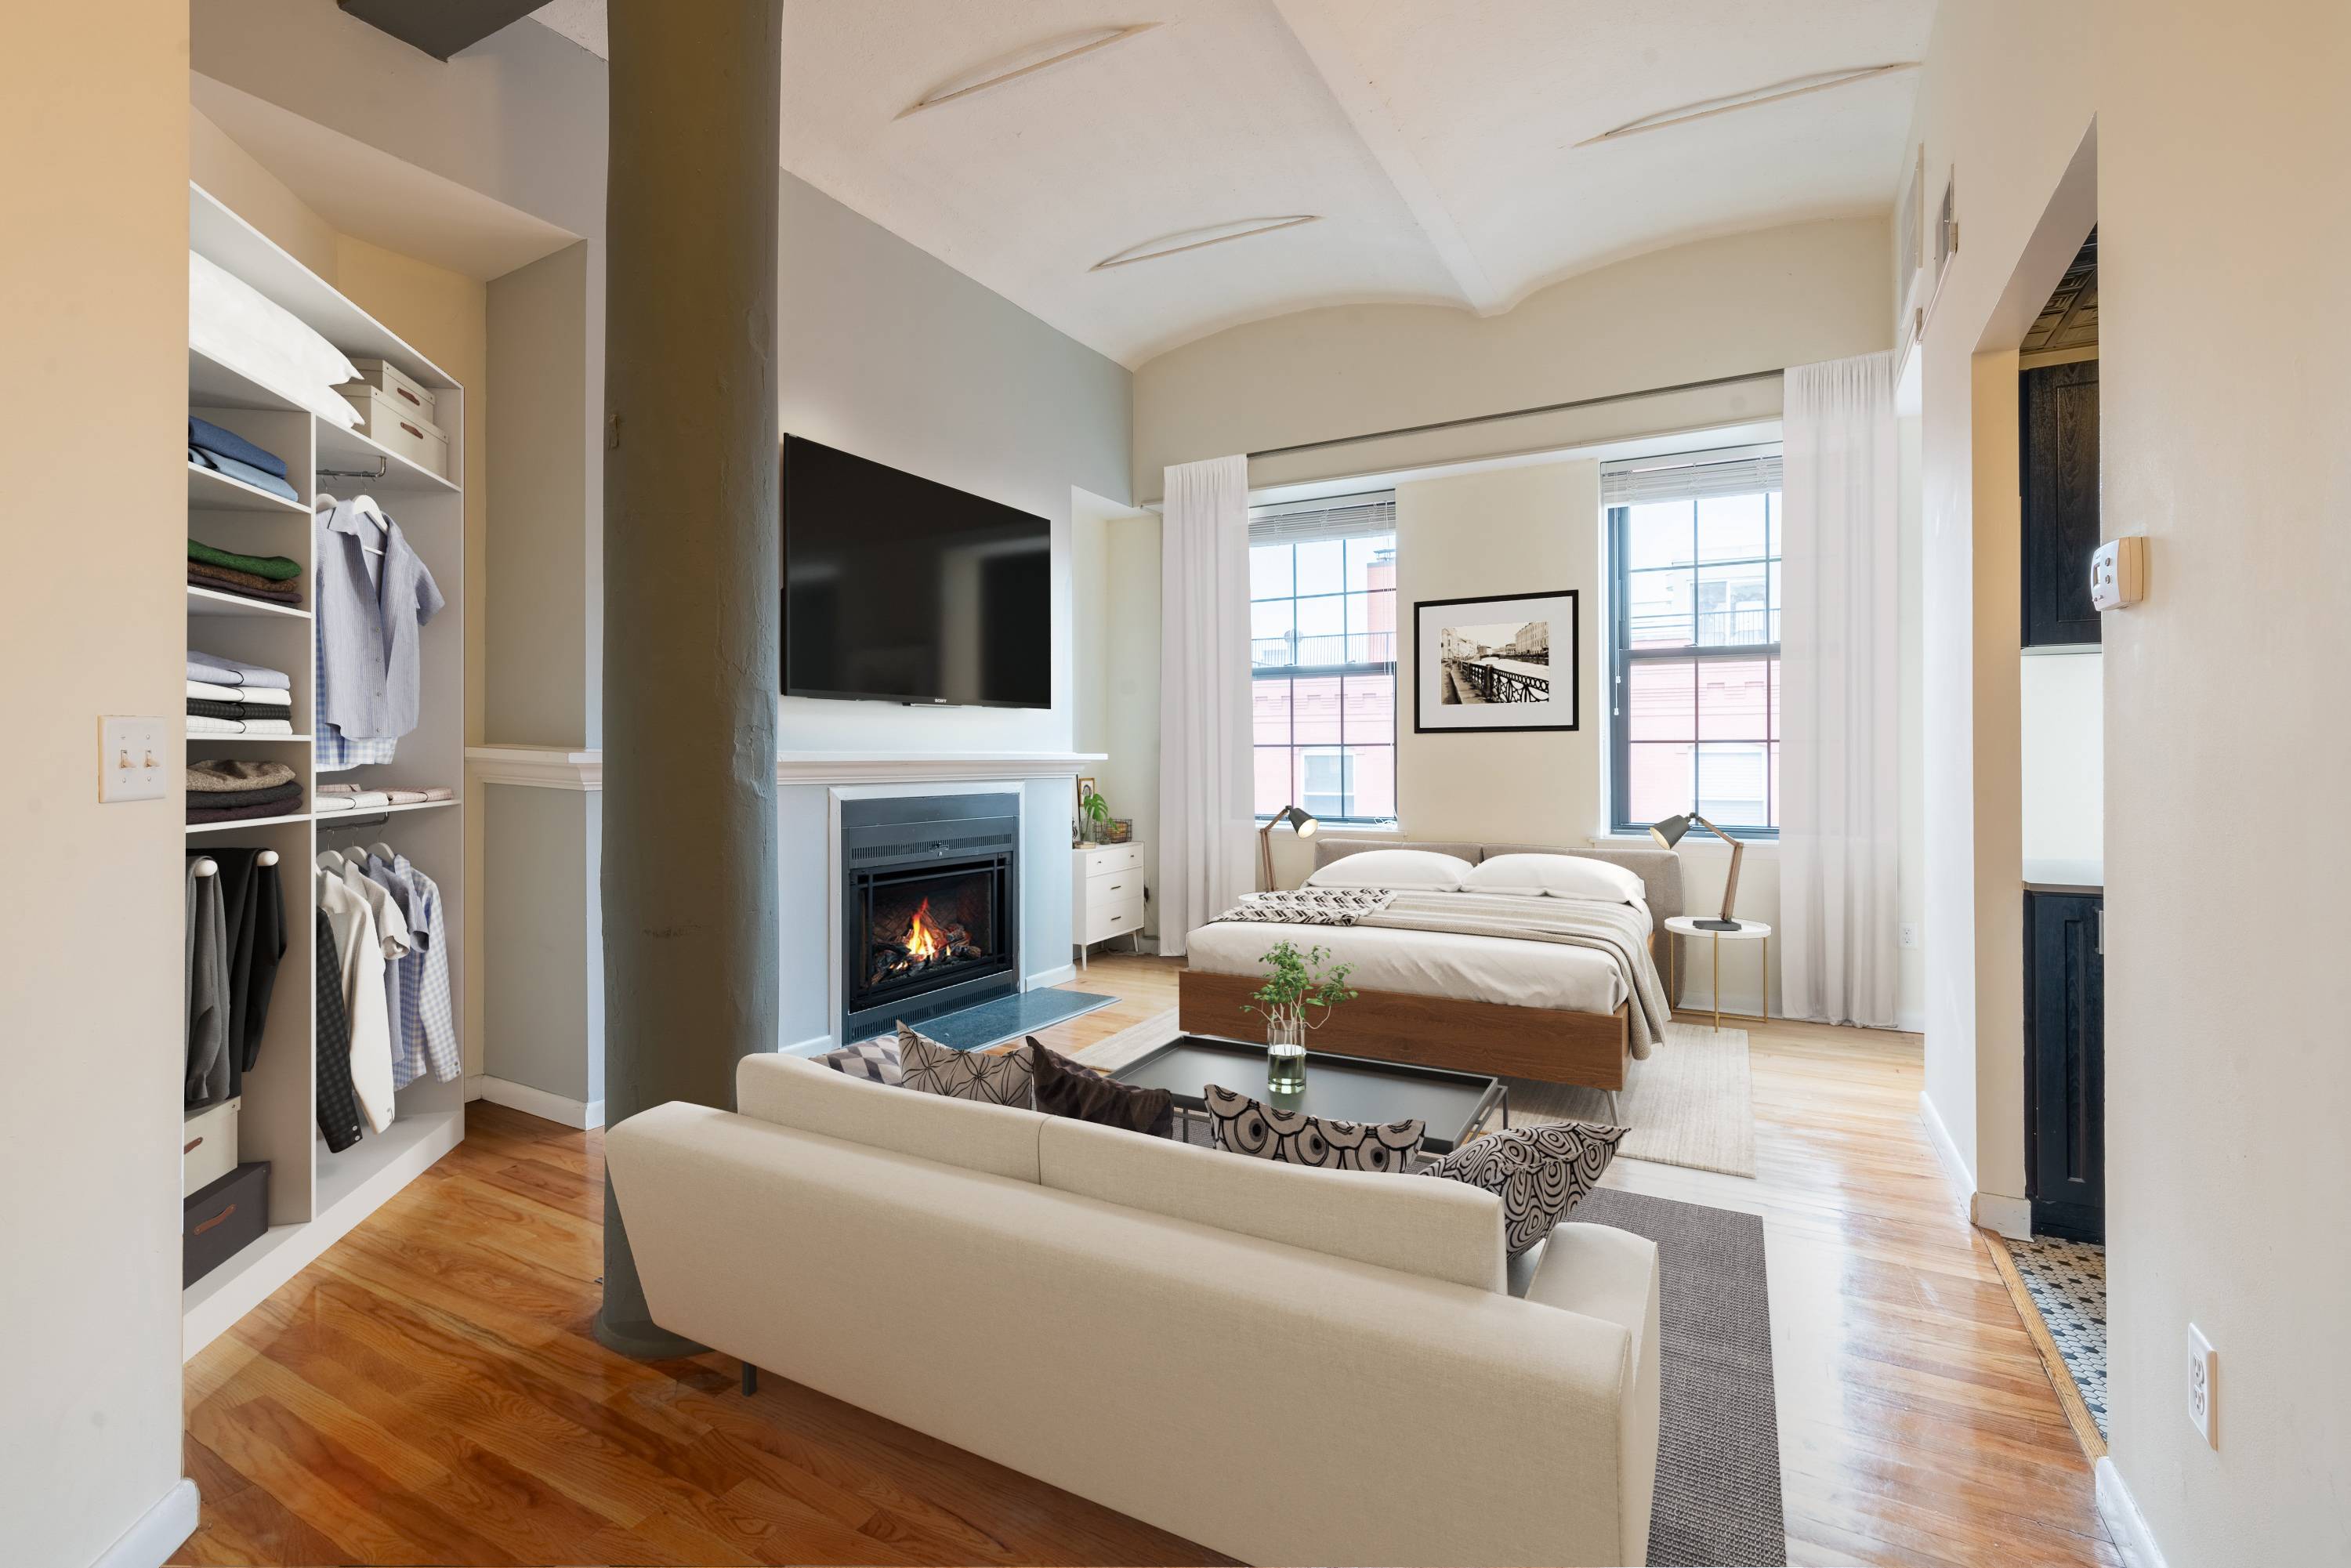 Stunning Studio Soho-Style Loft located in the heart of Downtown Hoboken!  Studio - 3 Bedroom Homes!  No Broker Fees! Close to Washington Street, Hoboken Path and Lightrail! Wood Burning Fireplace!